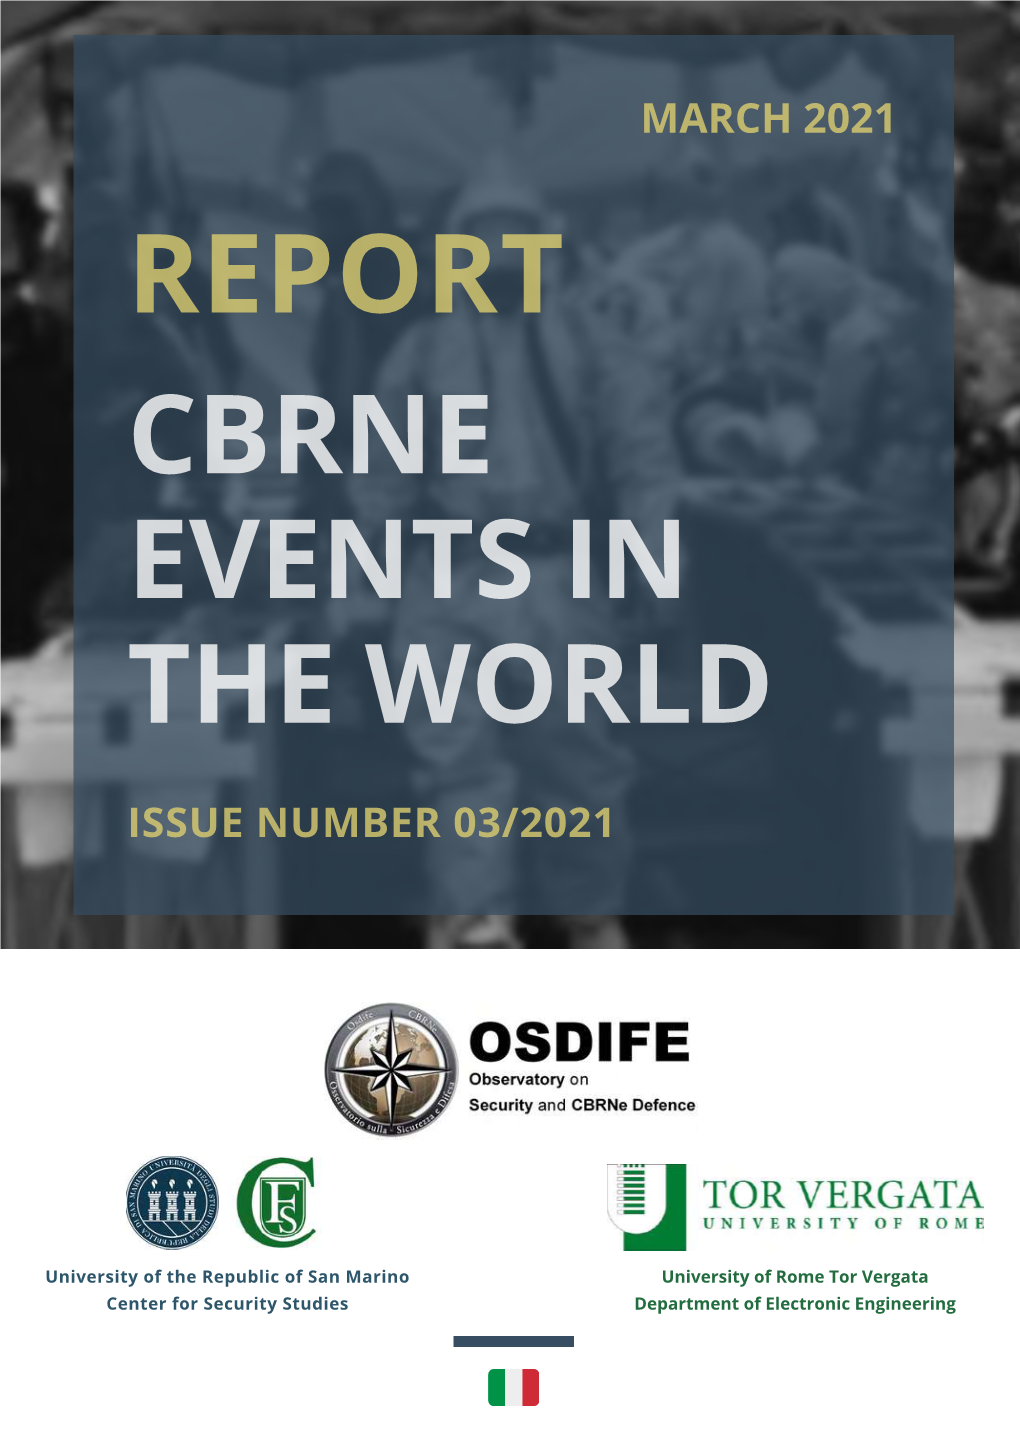 Cbrne Events in the World Report